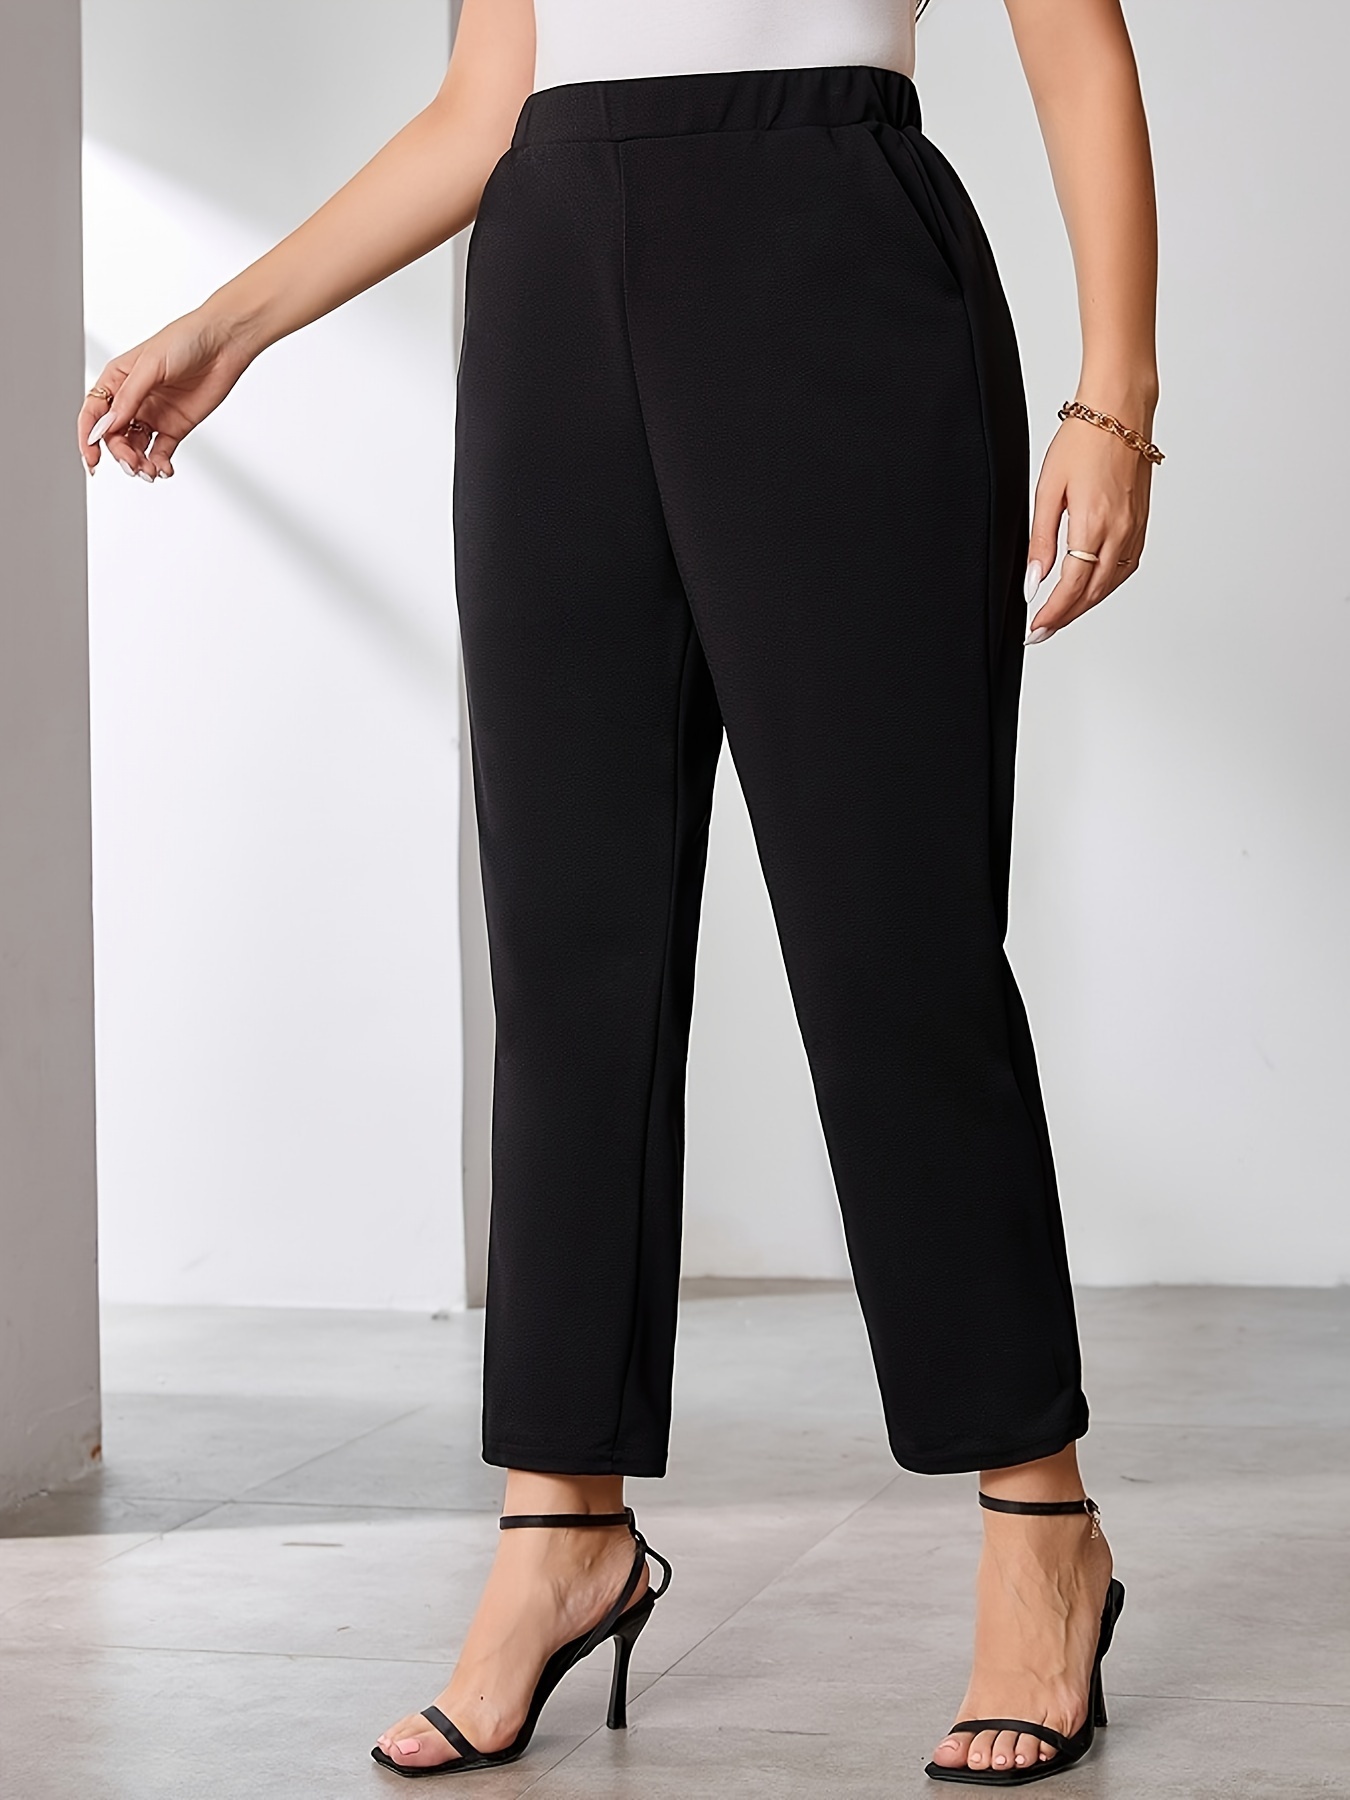  Business Casual Pants For Women Stretch High